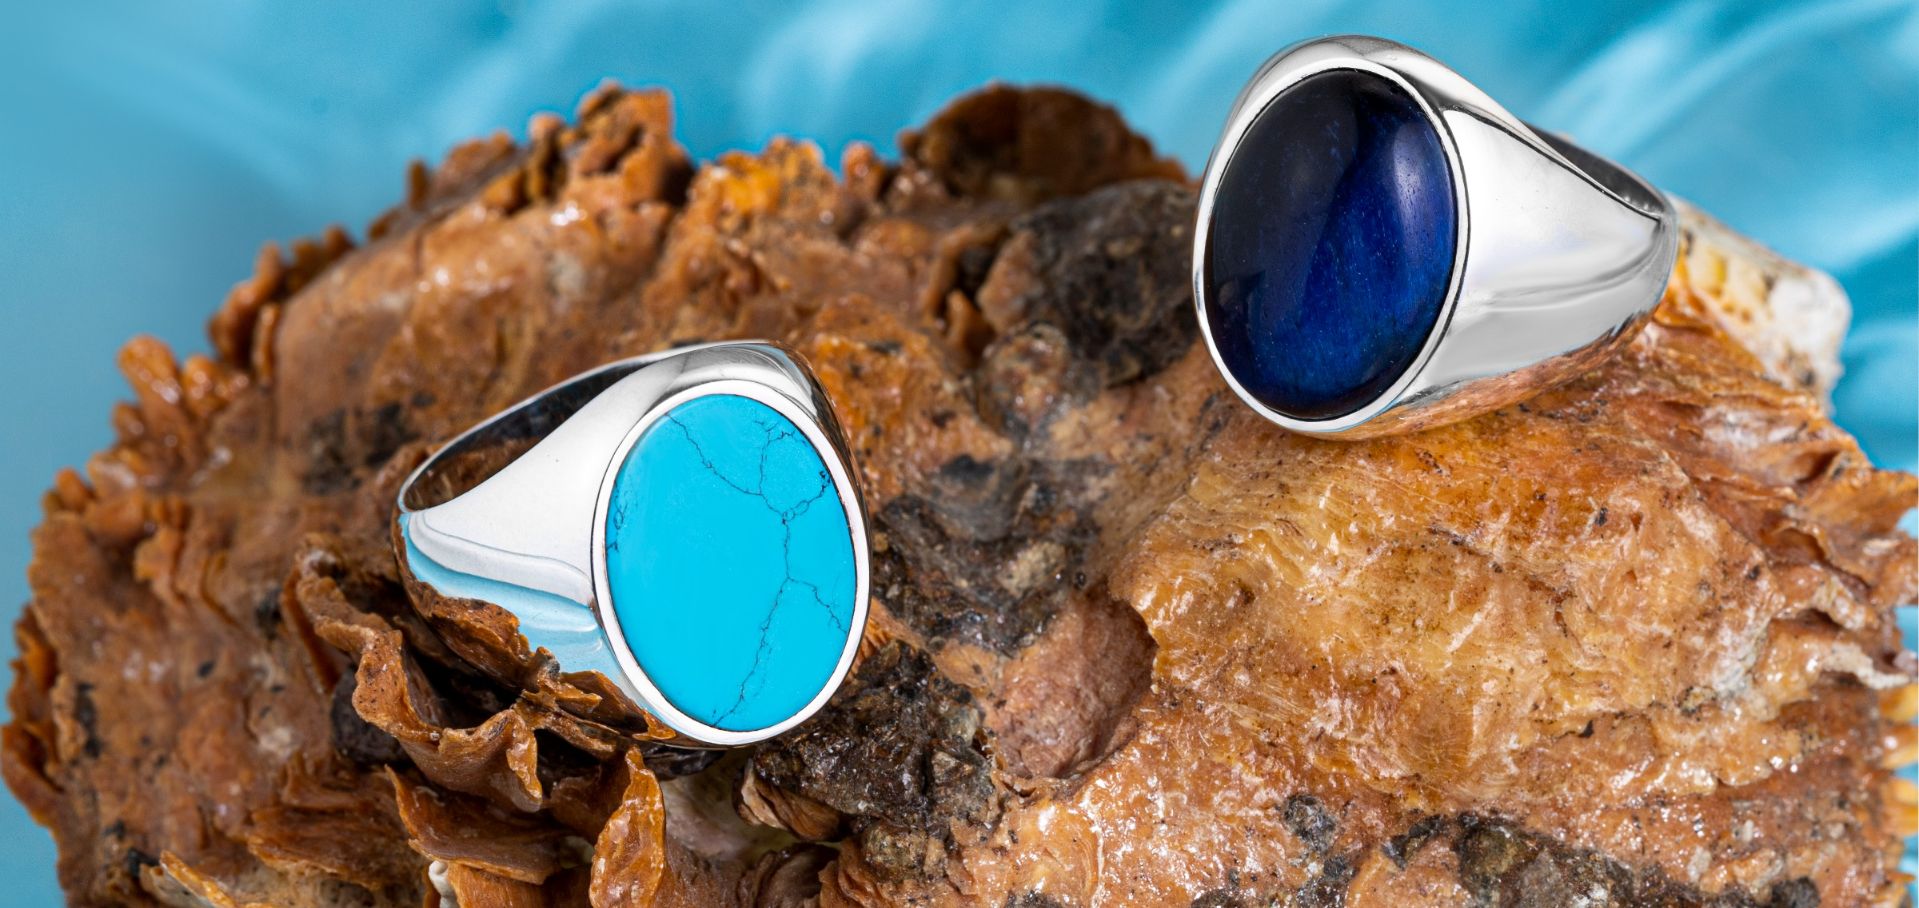 Turquoise: Properties, Benefits & Meanings - Blue Earth Gems